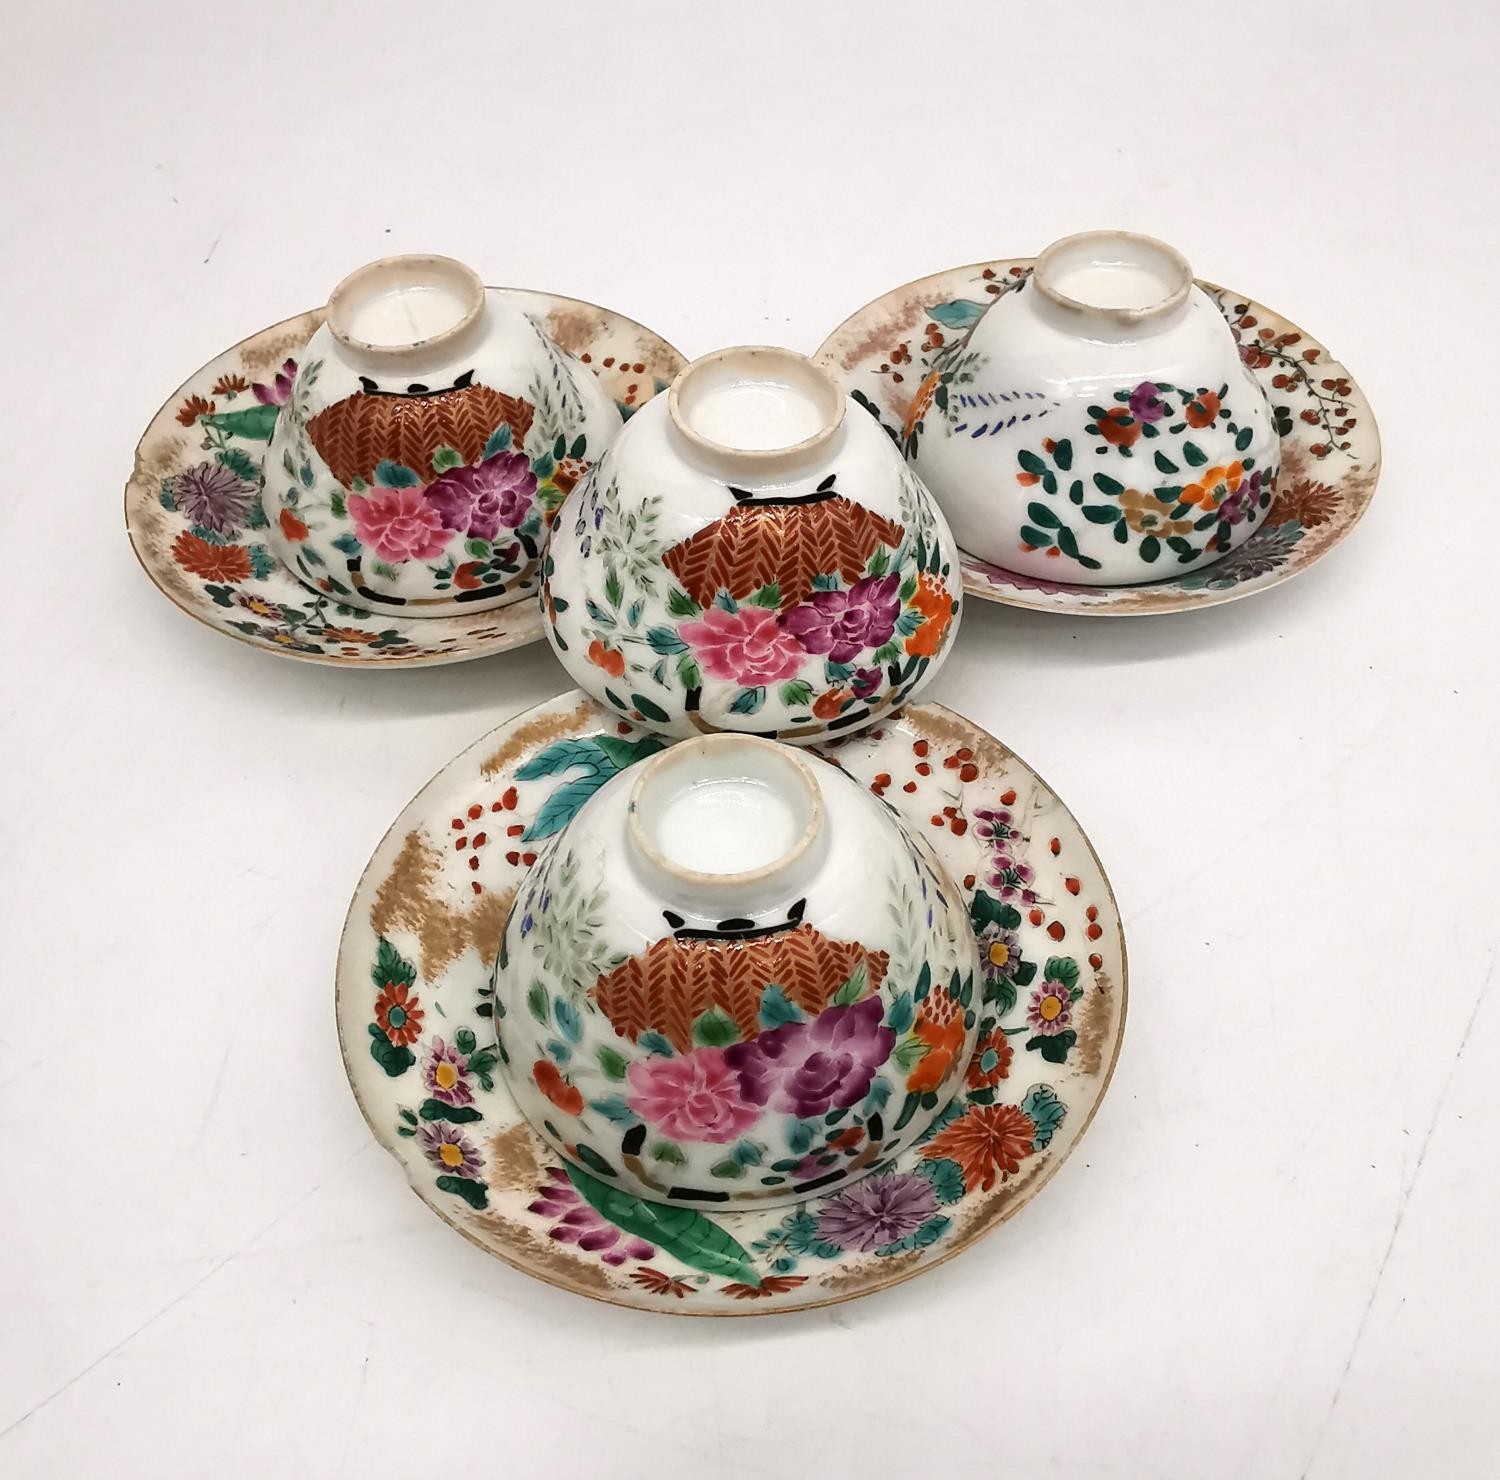 A collection of four Famille rose style egg shell porcelain hand painted tea bowls and three - Image 2 of 7